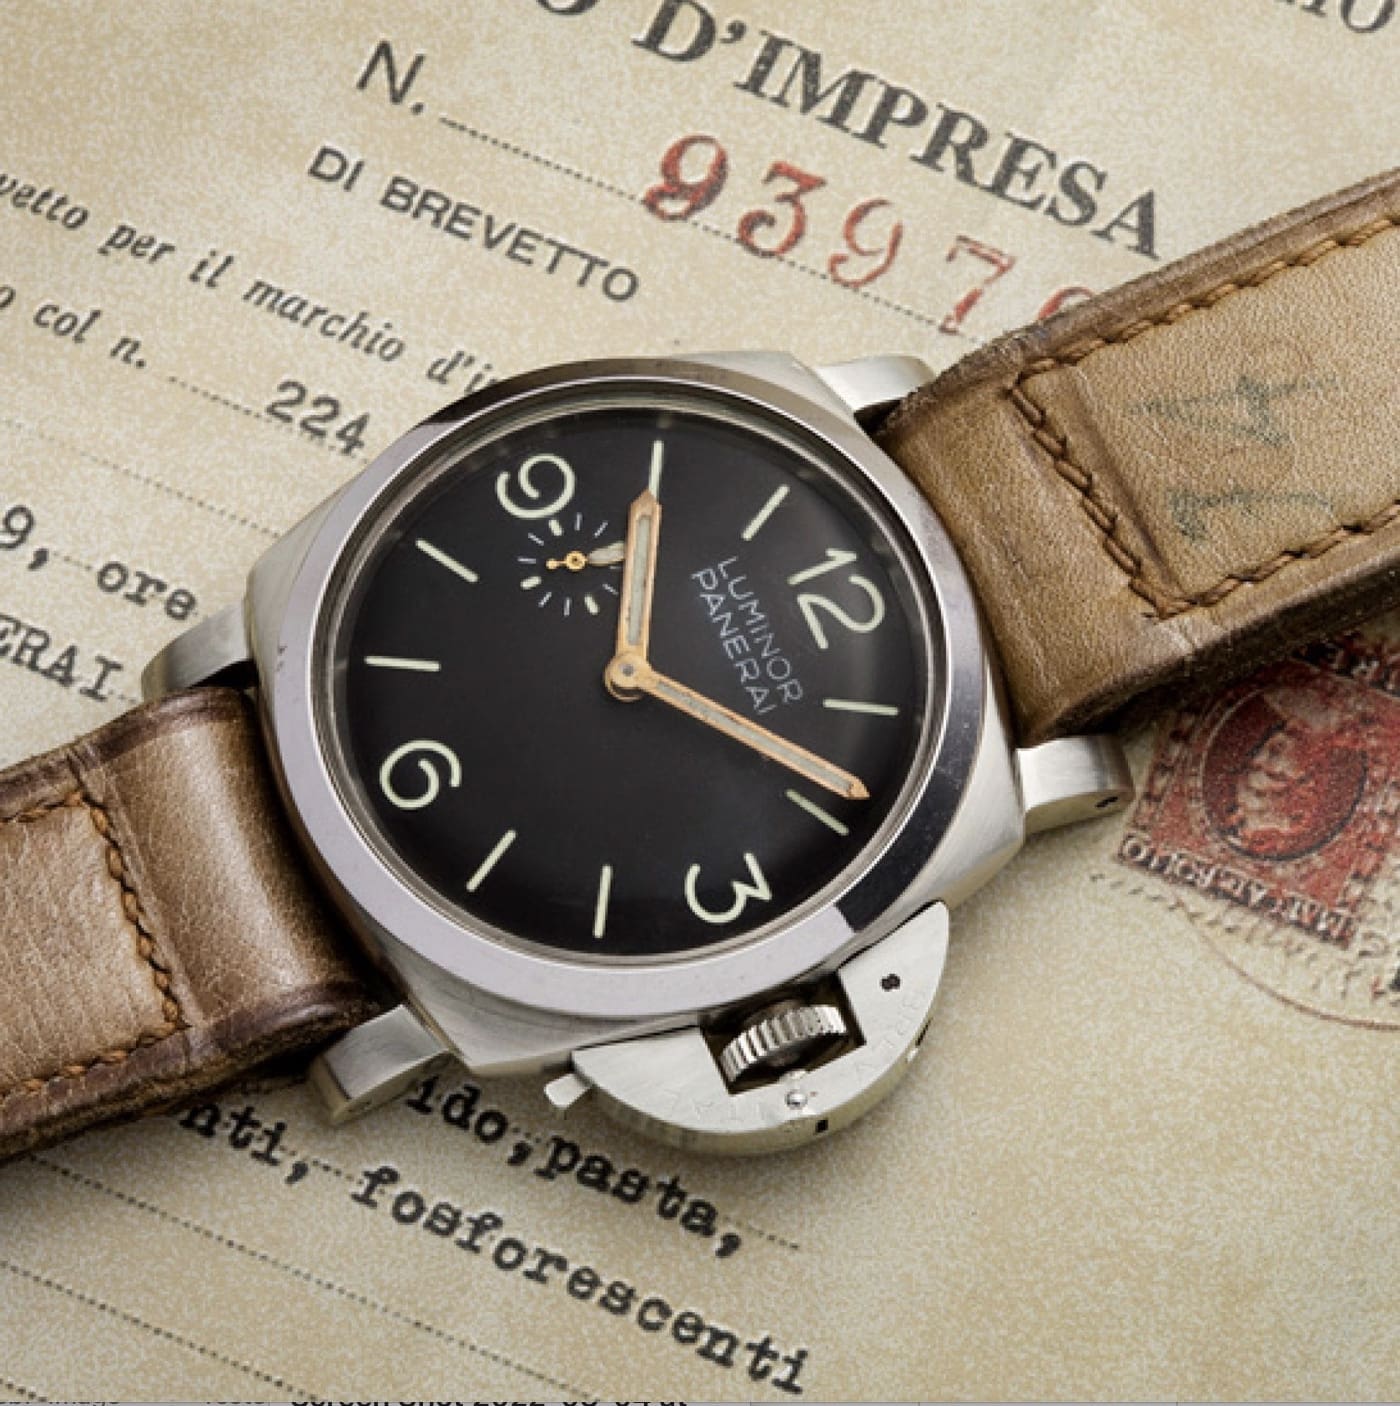 Panerai Luminor is a tool watch with heavyweight punch